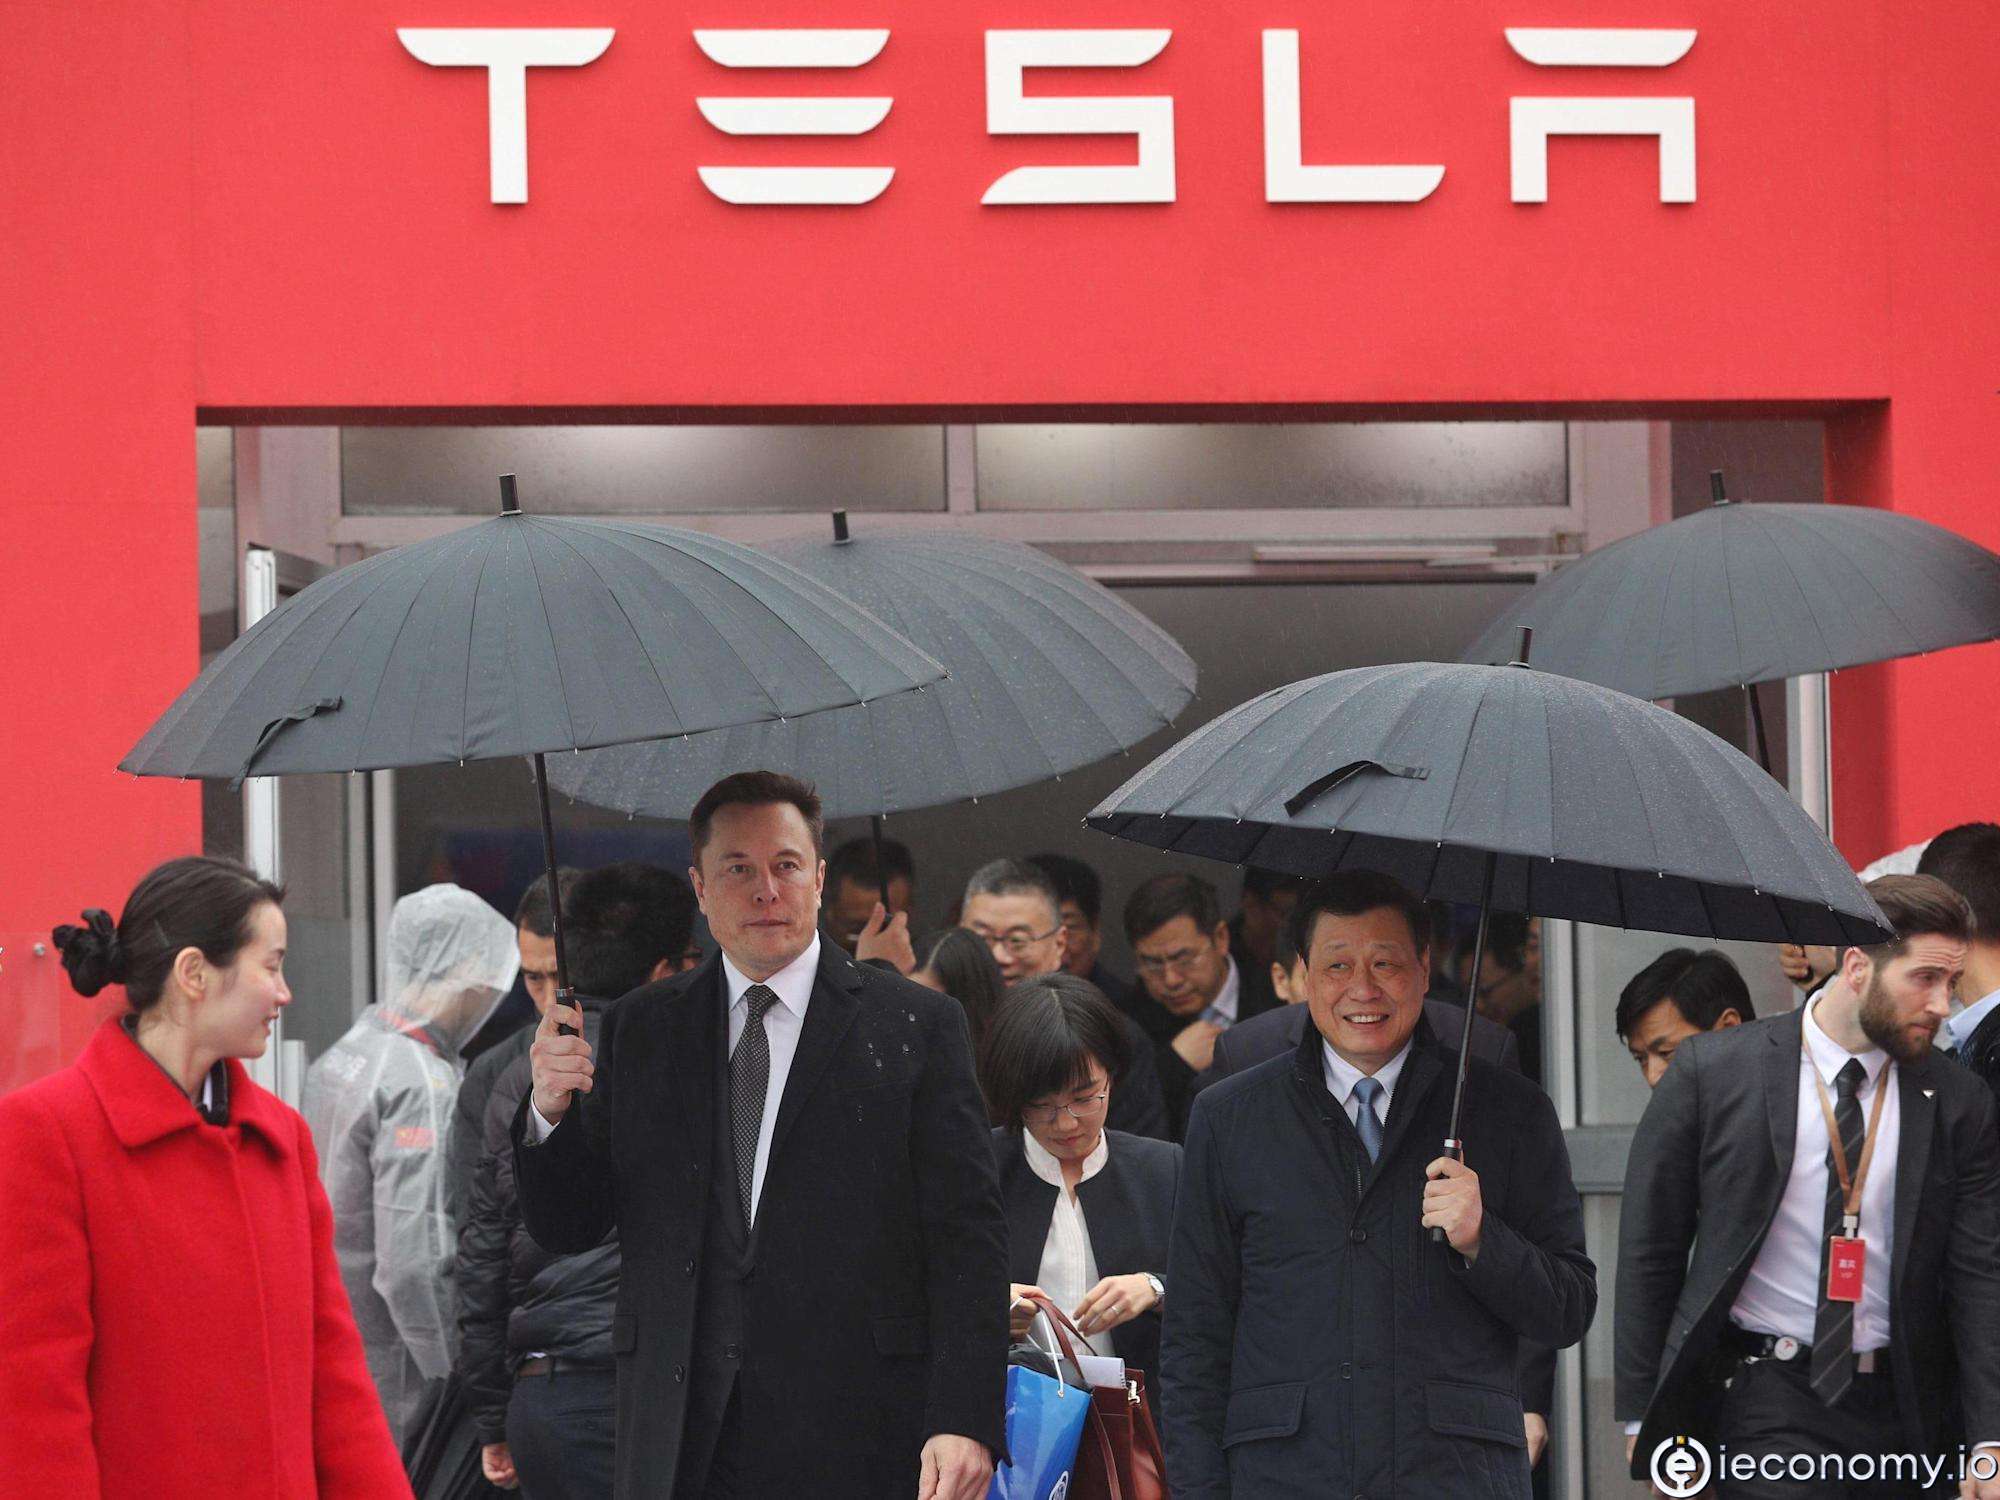 The trade war is hindering the expansion of Tesla in China